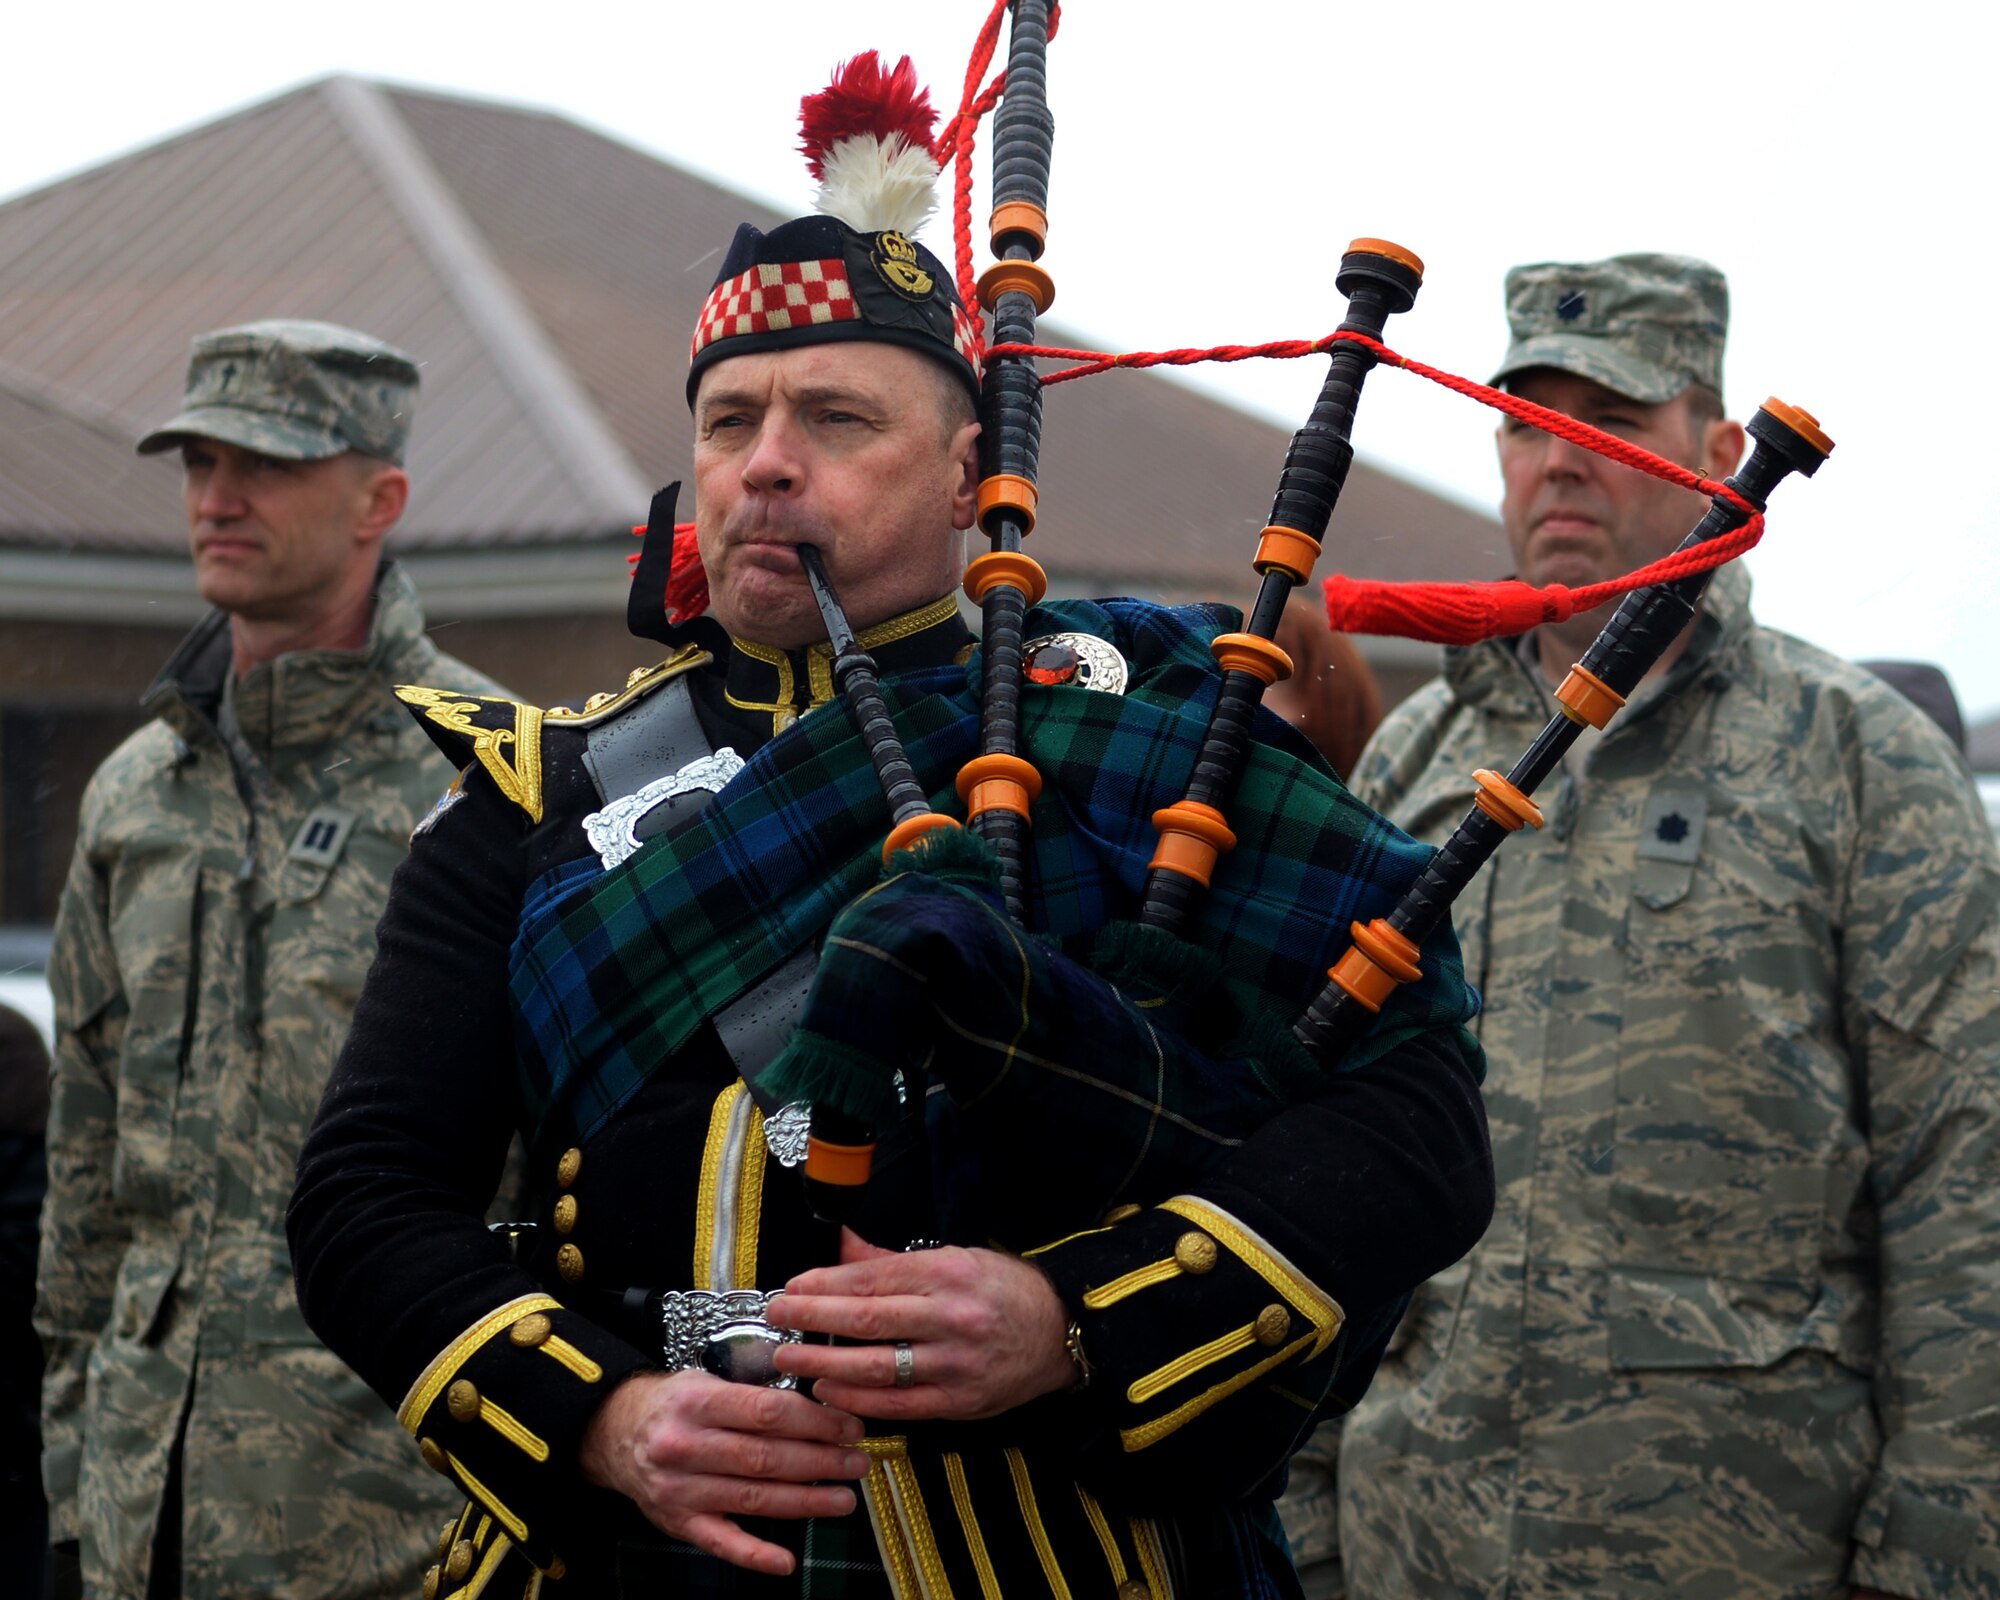 Will Bissett, a bagpiper, plays during the remembrance ceremony March 31, 2015, at the 7th Special Operations Squadron on RAF Mildenhall, England. The ceremony, held in honor of the 10th anniversary of the nine Airmen who died when WRATH-11, an MC-130H Combat Talon II assigned to the 7th SOS, crashed in Albania on March 31, 2005. The flight was part of a training exercise with two other aircraft to train on low-level and low-light flying. Bissett has played for the 7th SOS since the time the unit was stationed at RAF Alconbury. (U.S. Air Force photo by Senior Airman Victoria H. Taylor)